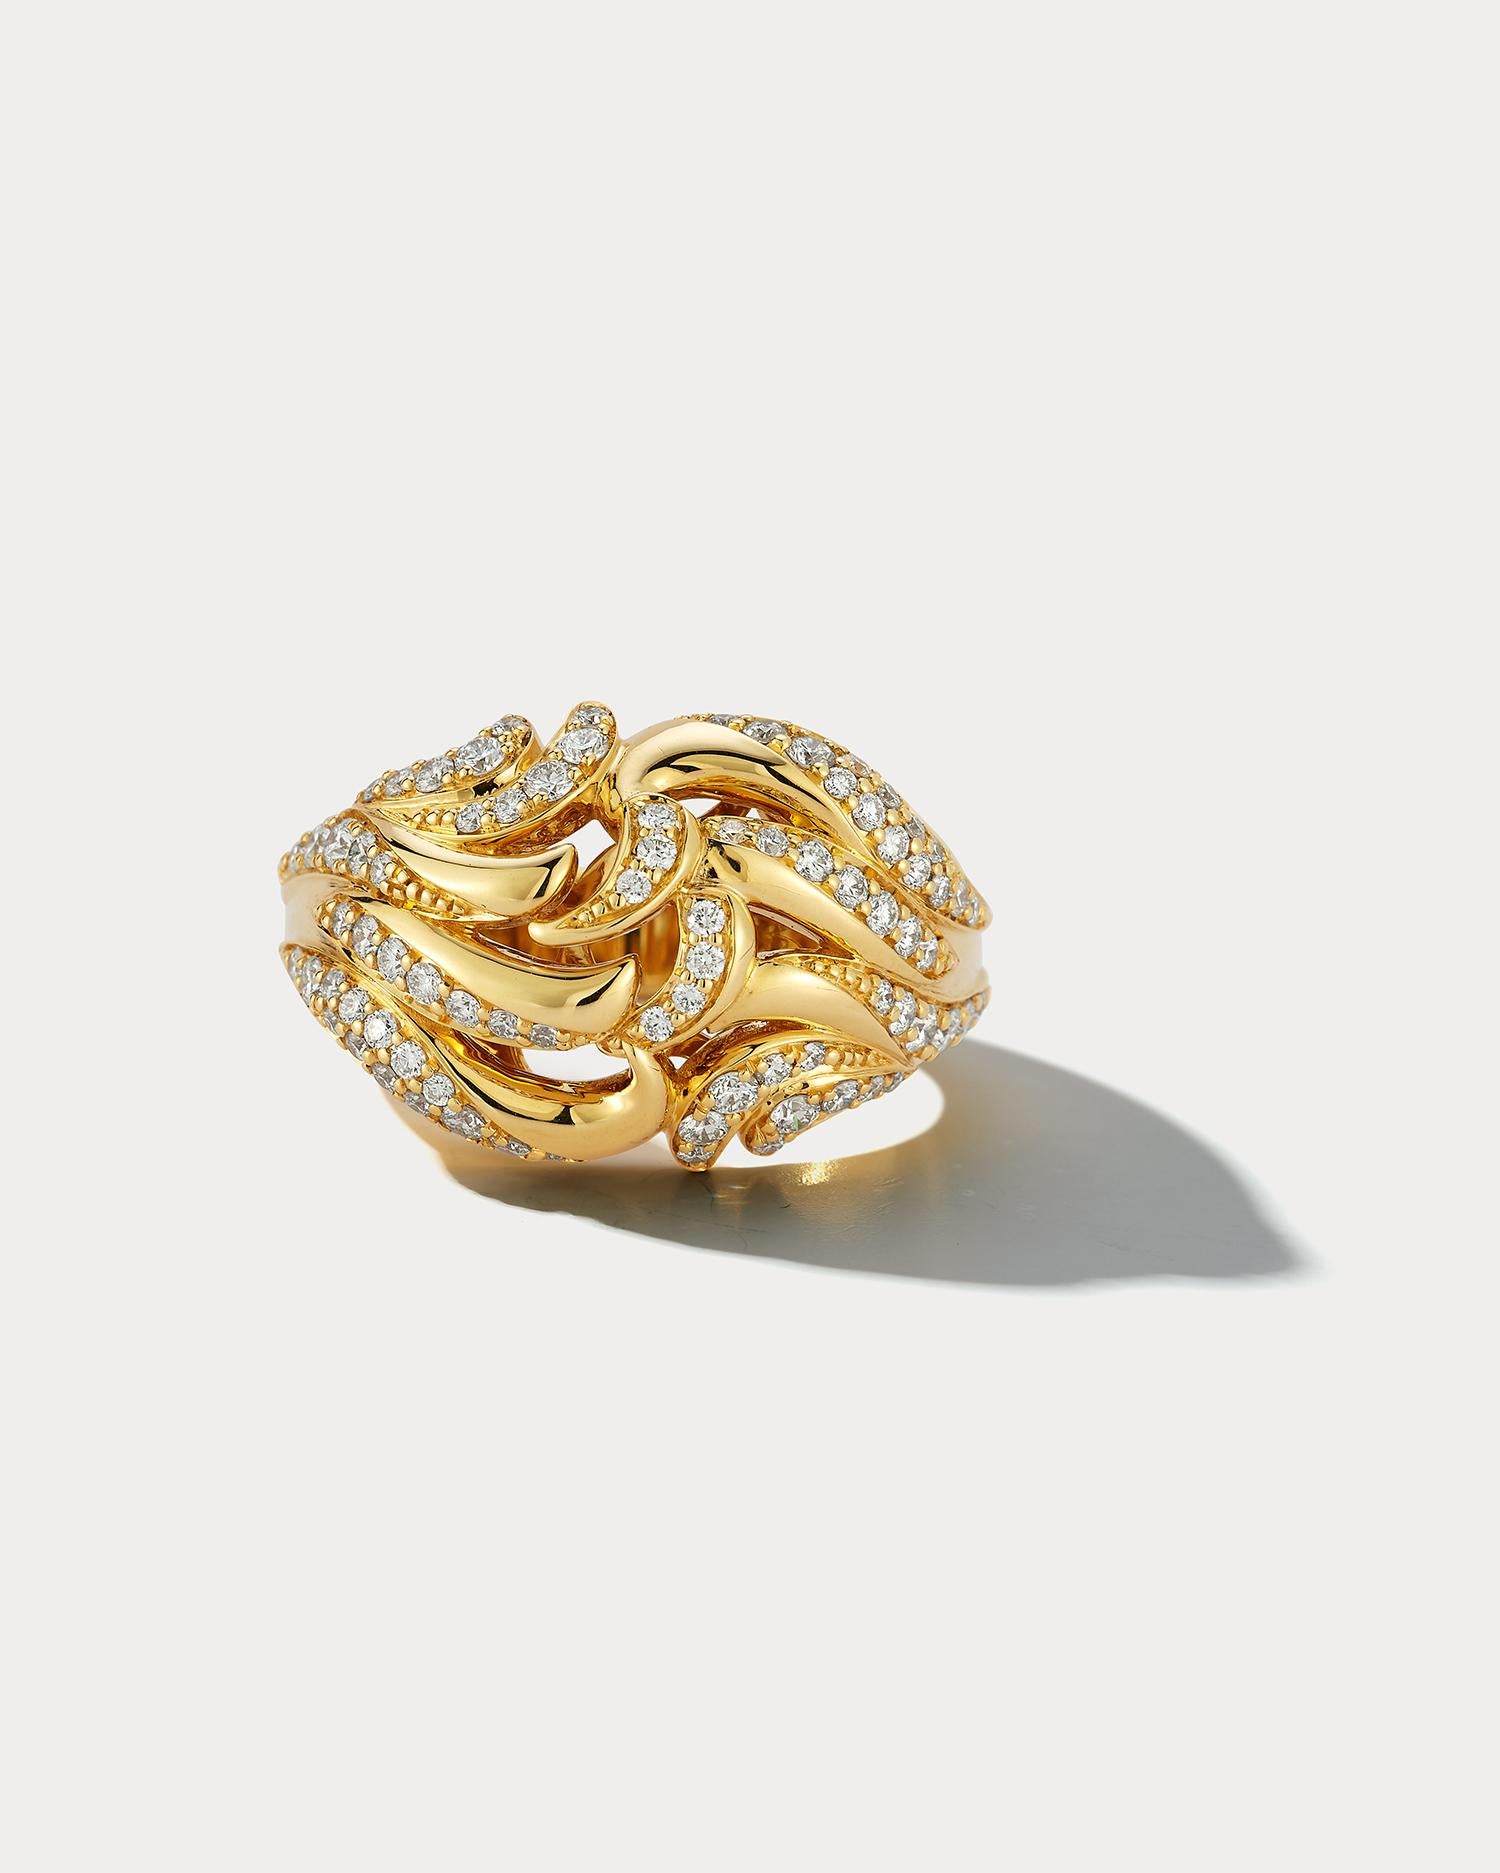 This wave ring is a beautiful and unique piece of jewelry that can add a touch of elegance and sophistication to any outfit. The wave design of the ring is a beautiful and intricate detail that adds a sense of movement and fluidity to the